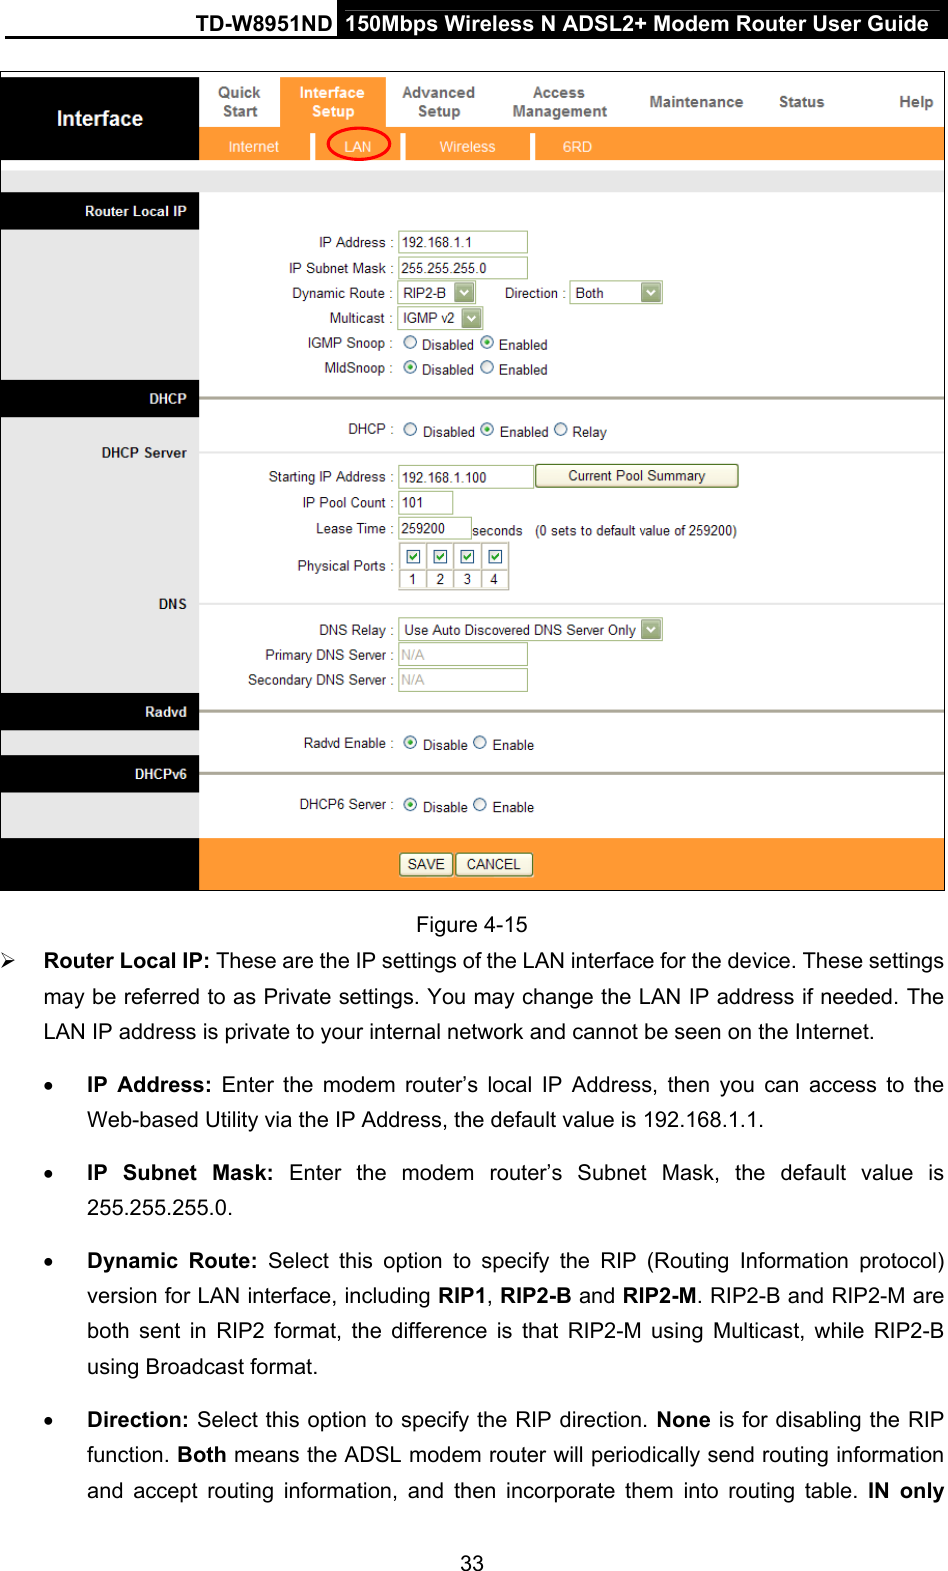 TD-W8951ND  150Mbps Wireless N ADSL2+ Modem Router User Guide  Figure 4-15  Router Local IP: These are the IP settings of the LAN interface for the device. These settings may be referred to as Private settings. You may change the LAN IP address if needed. The LAN IP address is private to your internal network and cannot be seen on the Internet.  IP Address: Enter the modem router’s local IP Address, then you can access to the Web-based Utility via the IP Address, the default value is 192.168.1.1.  IP Subnet Mask: Enter the modem router’s Subnet Mask, the default value is 255.255.255.0.  Dynamic Route: Select this option to specify the RIP (Routing Information protocol) version for LAN interface, including RIP1, RIP2-B and RIP2-M. RIP2-B and RIP2-M are both sent in RIP2 format, the difference is that RIP2-M using Multicast, while RIP2-B using Broadcast format.  Direction: Select this option to specify the RIP direction. None is for disabling the RIP function. Both means the ADSL modem router will periodically send routing information and accept routing information, and then incorporate them into routing table. IN only 33 